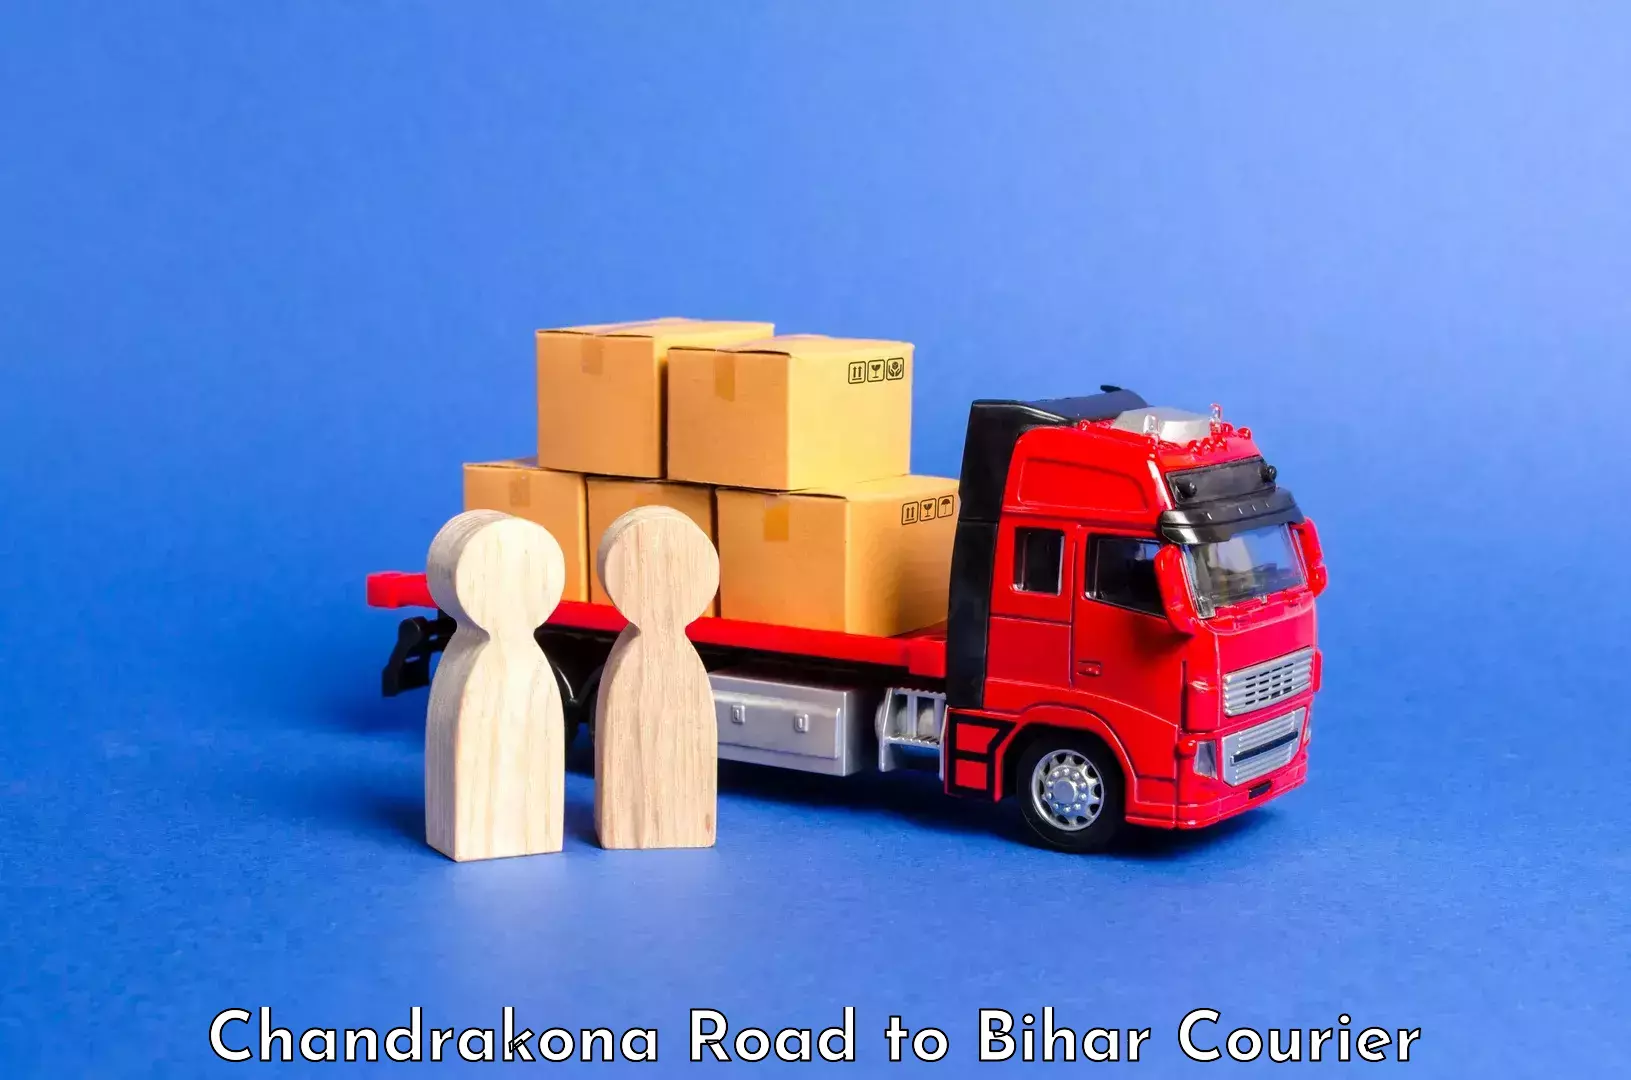 Reliable luggage courier Chandrakona Road to Bihar